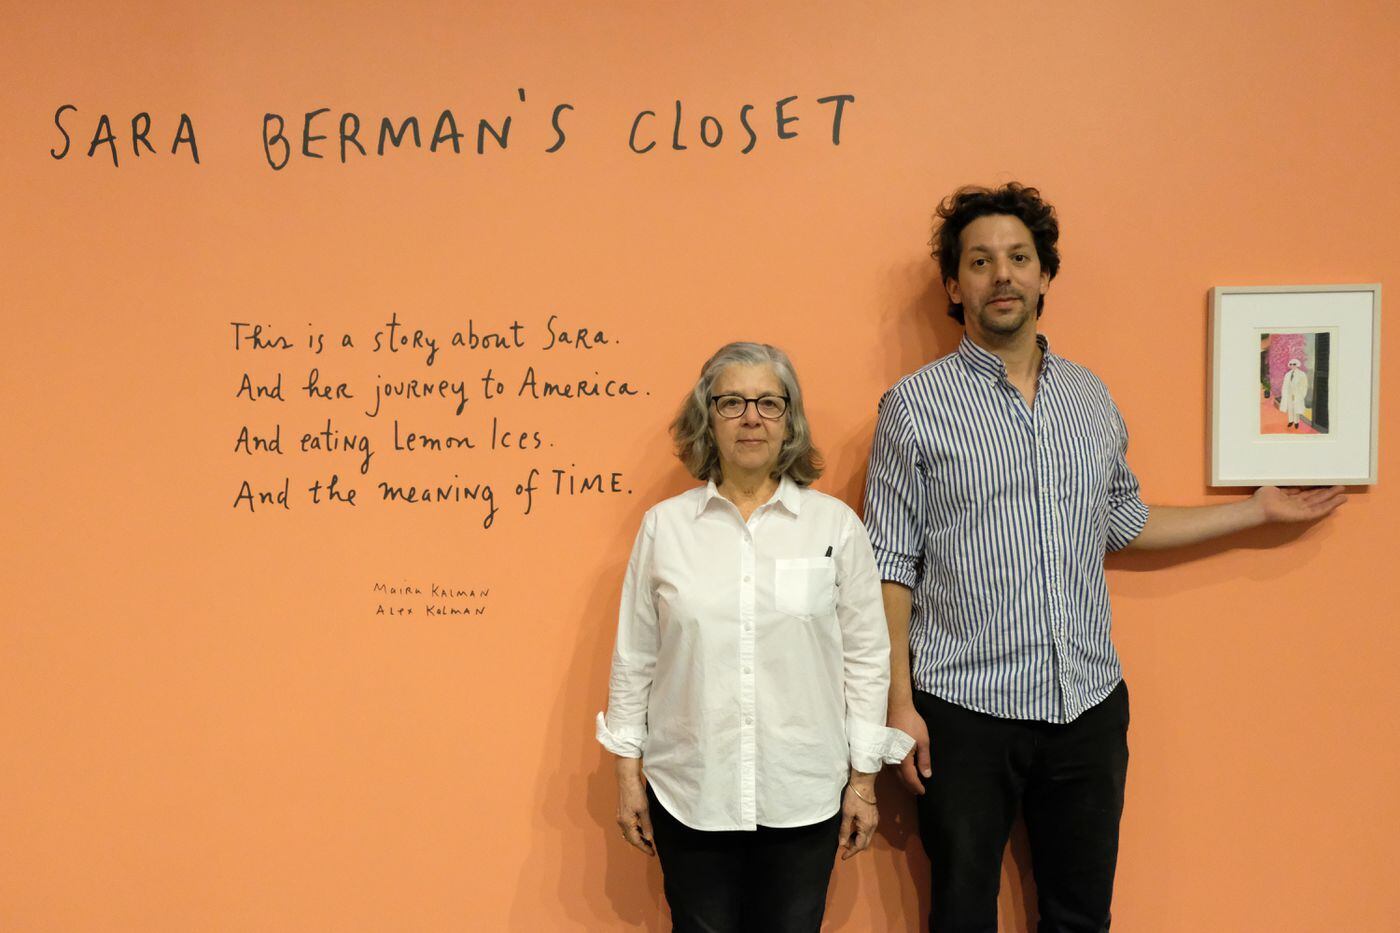 Maira and Alex Kalman, the artists who created the exhibition of Sara Berman's Closet at National Museum of American Jewish History. Sara is Maira's daughter and Alex's grandmother.